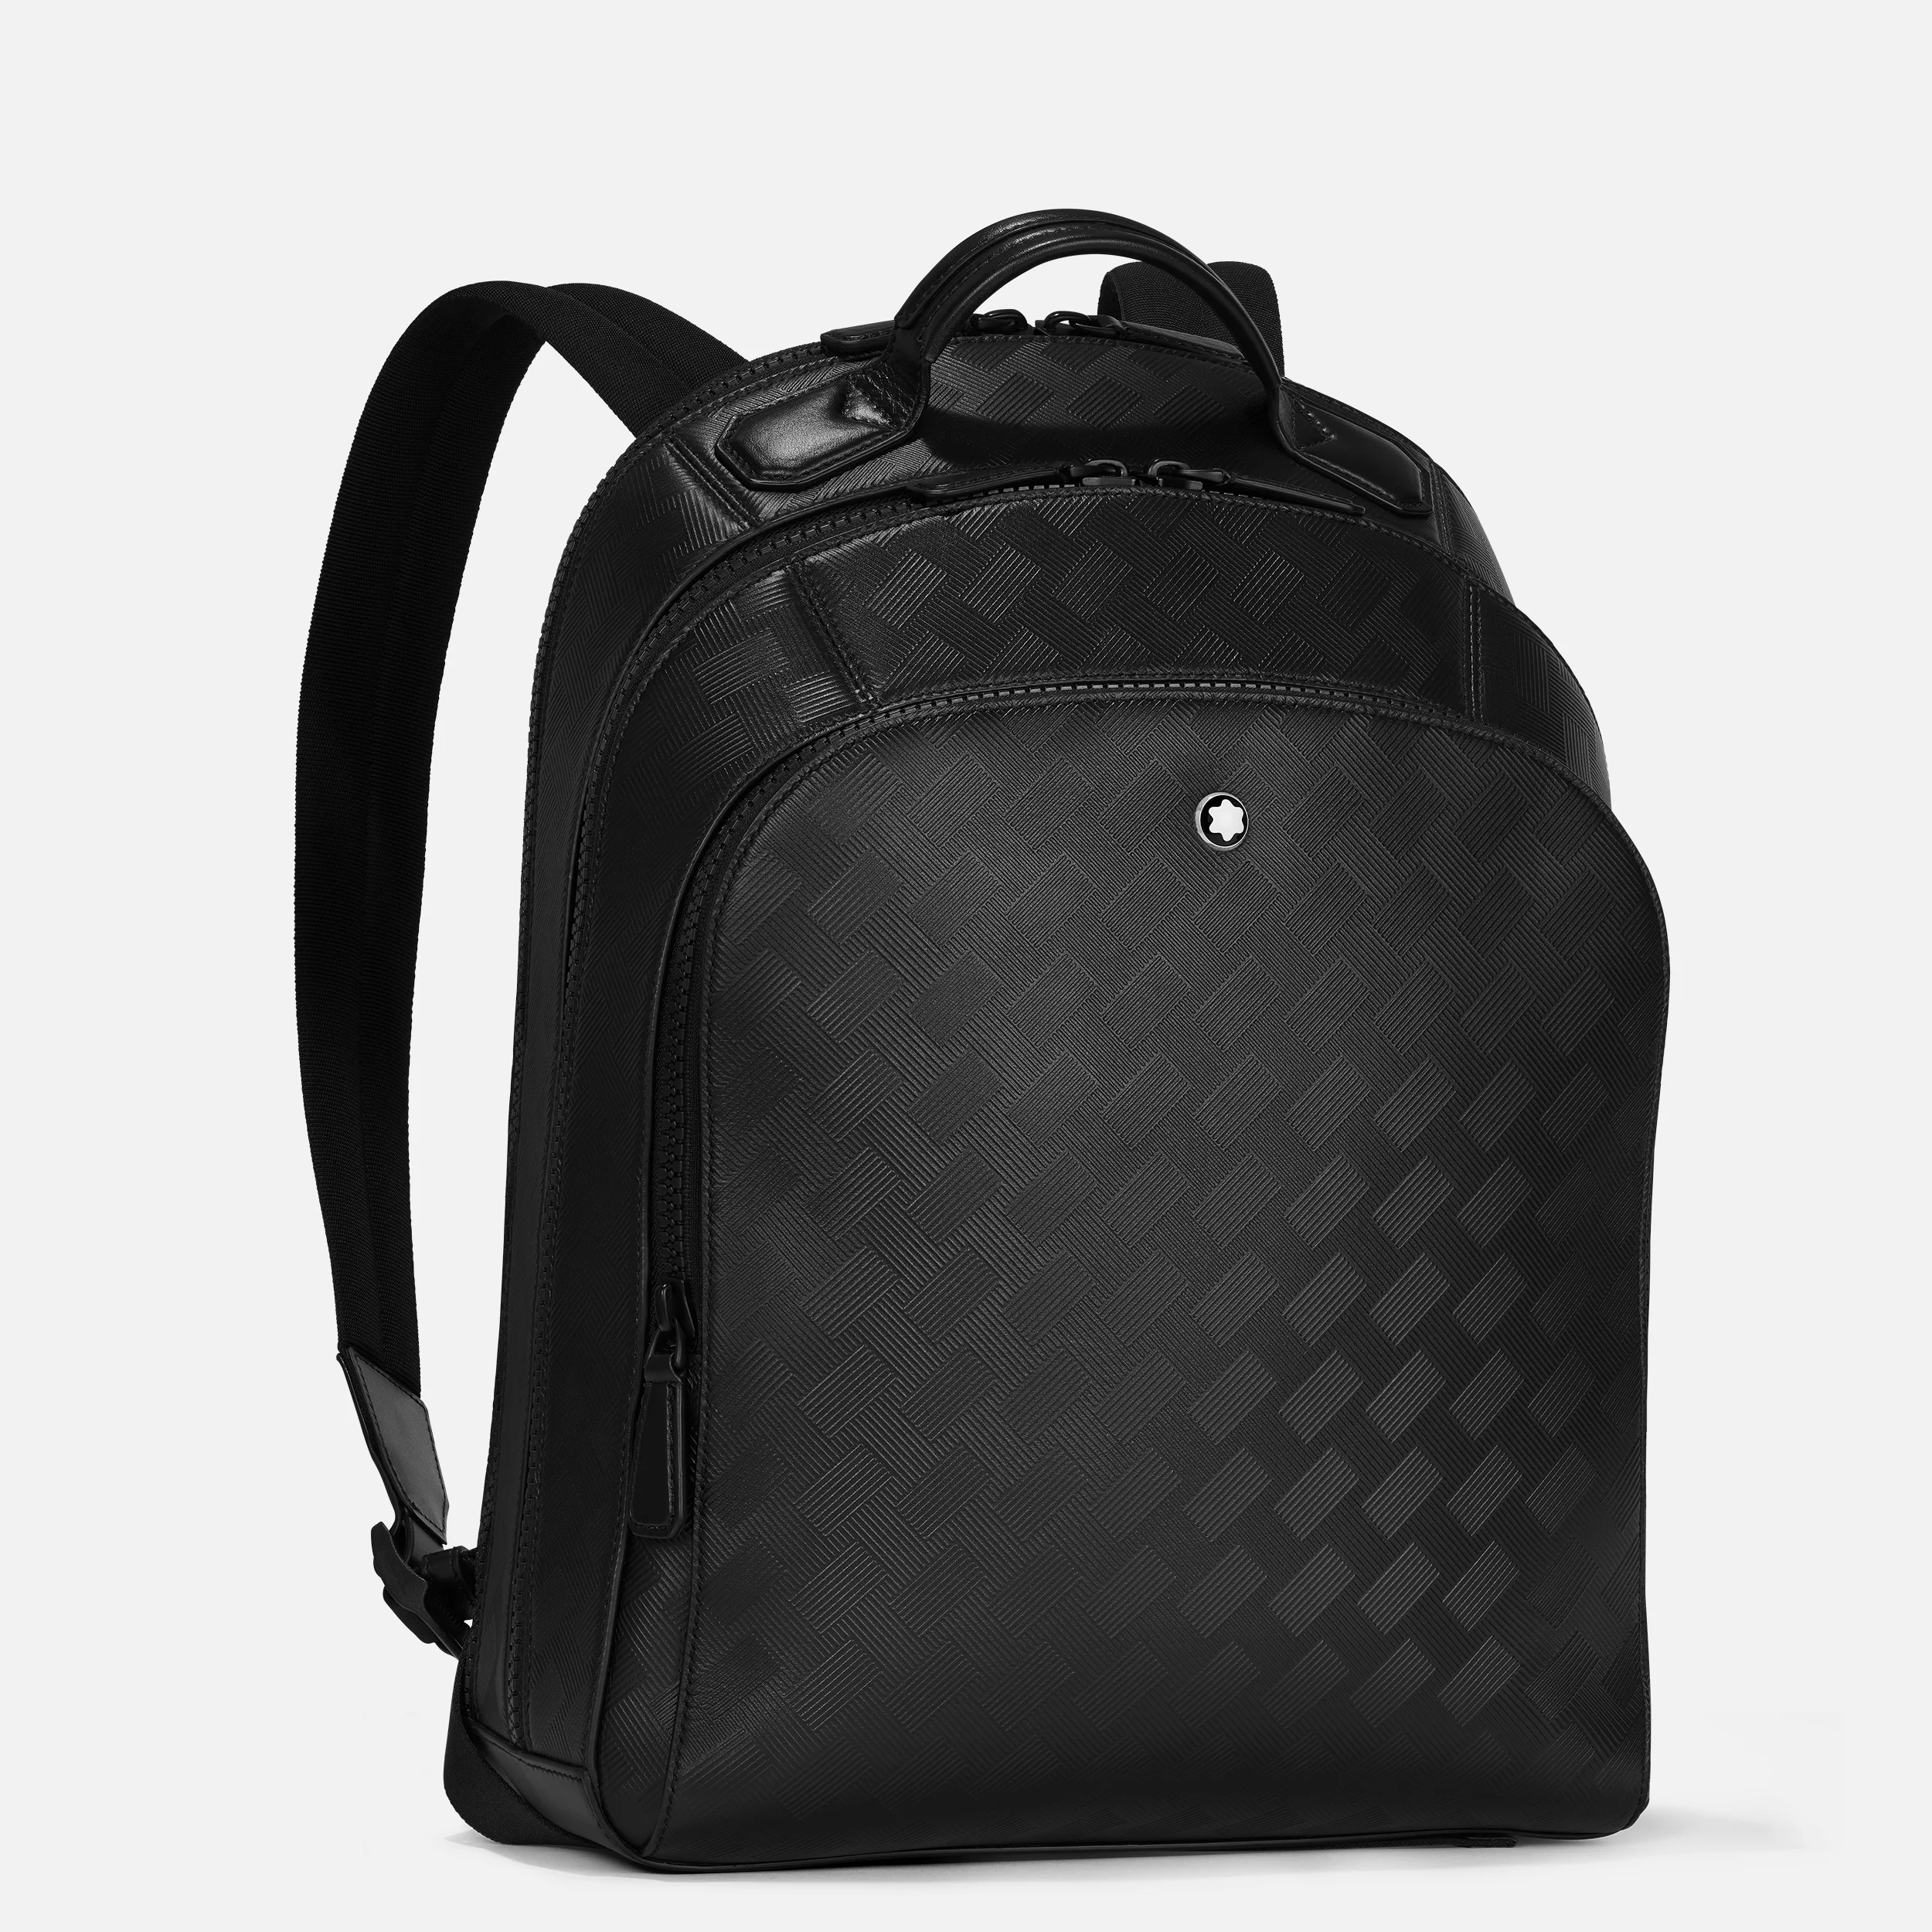 Montblanc Extreme 3.0 Backpack 3 Compartments Medium Black - Pencraft the boutique